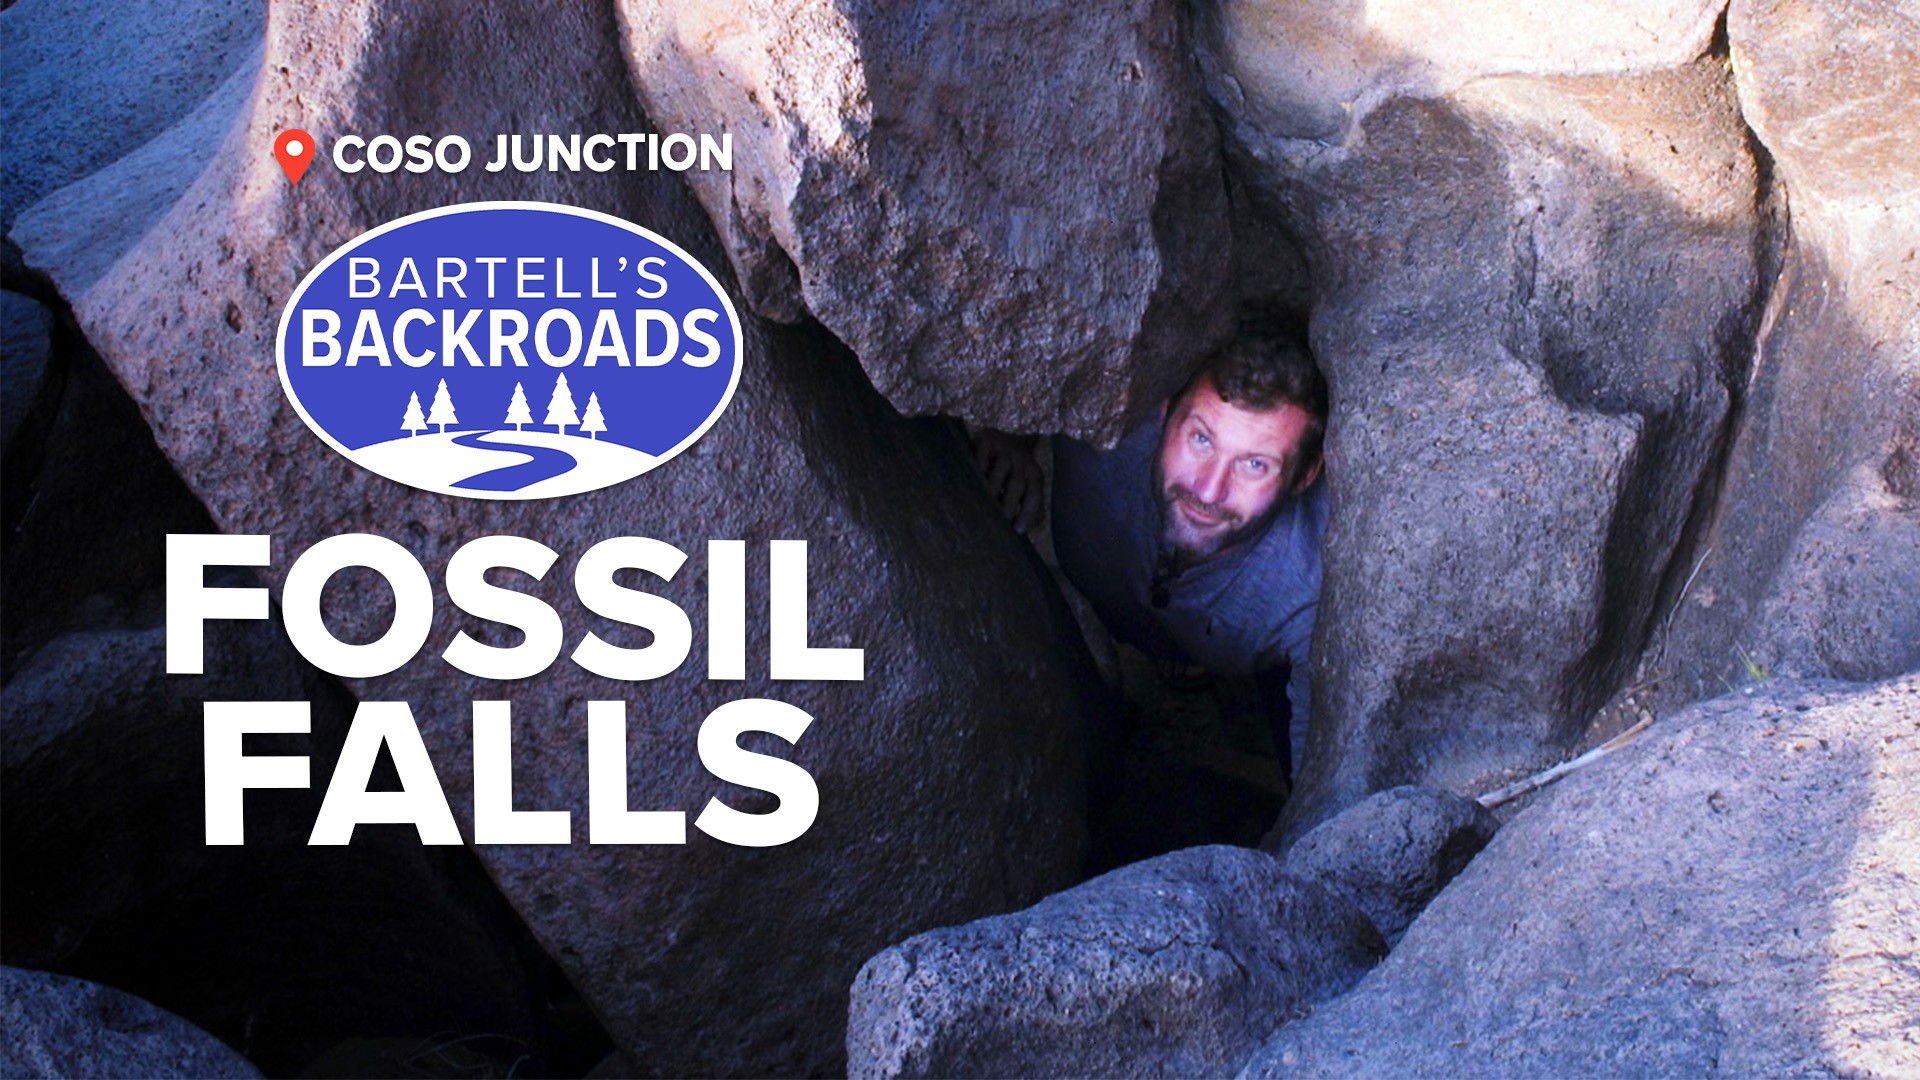 You will, however, be amazed by the Swiss cheese-shaped rocks!